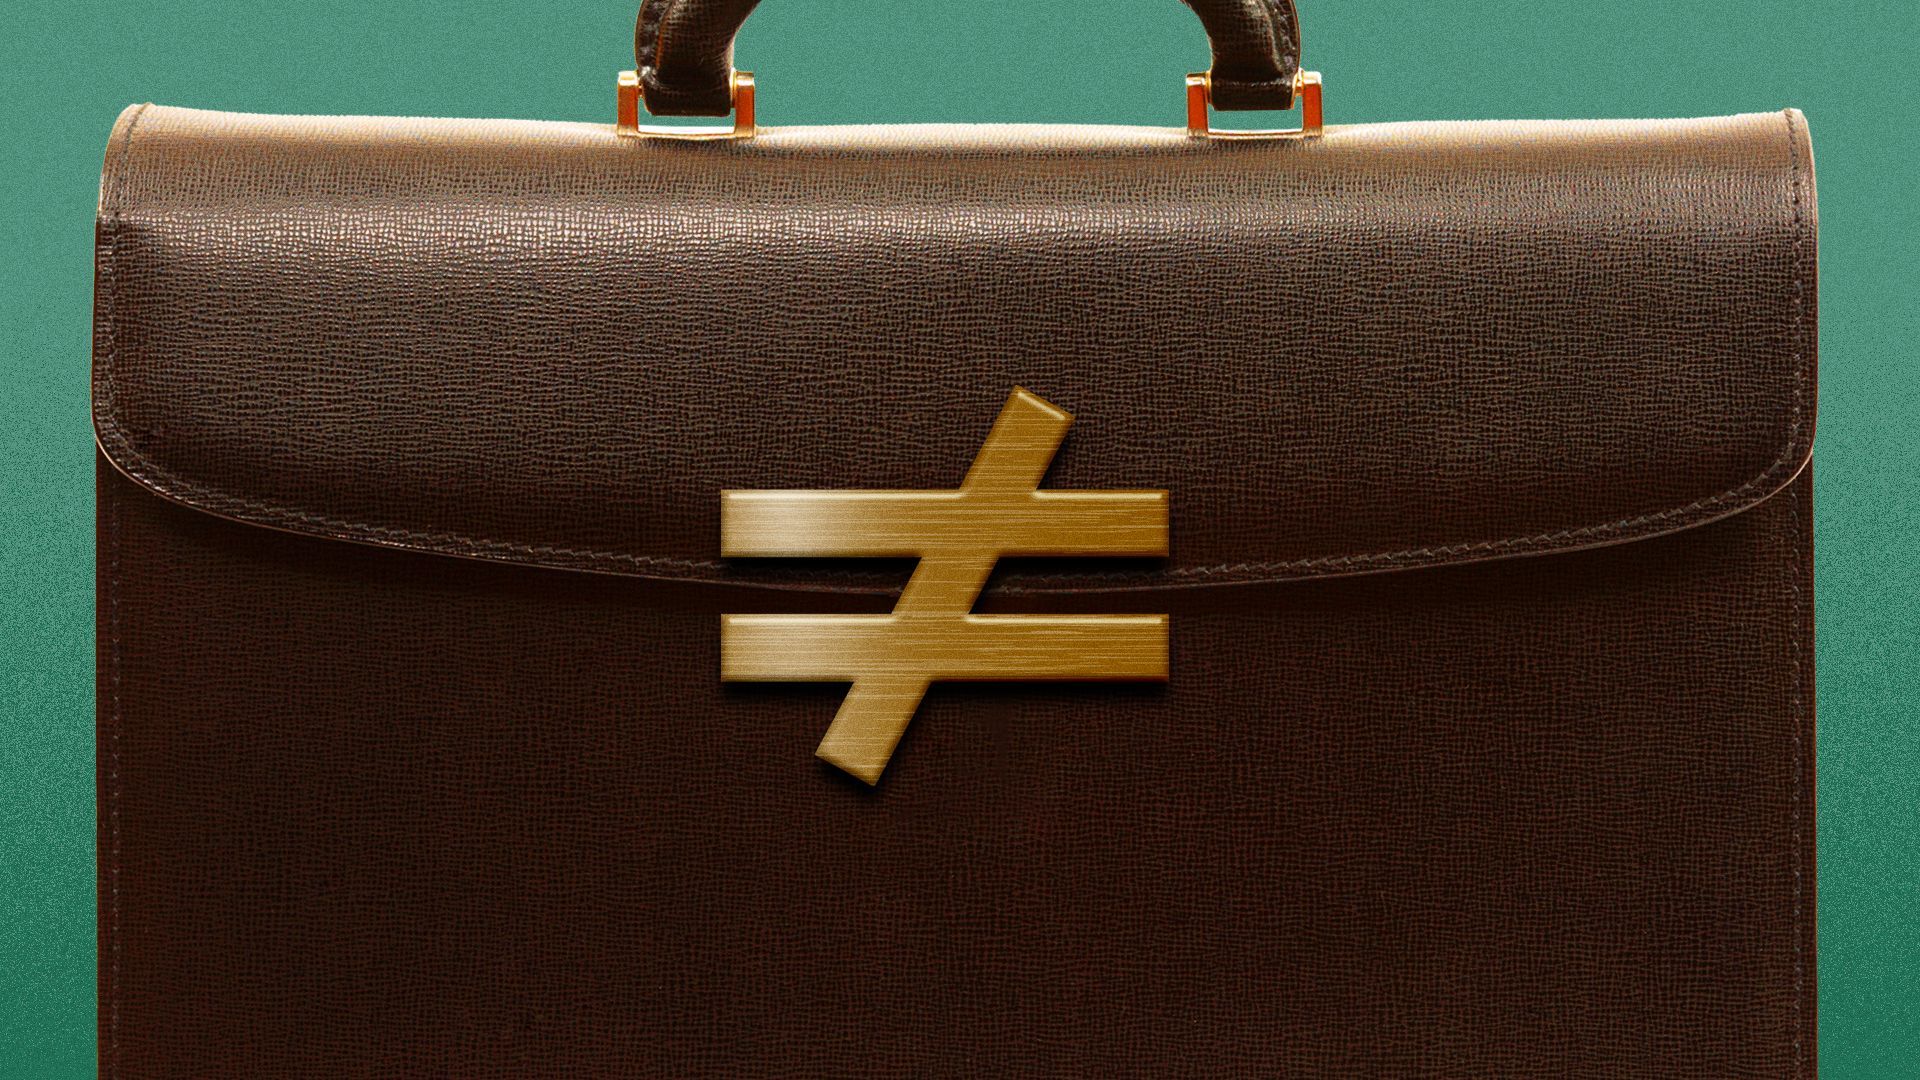 Illustration of an unequal sign as the clasp on a briefcase.